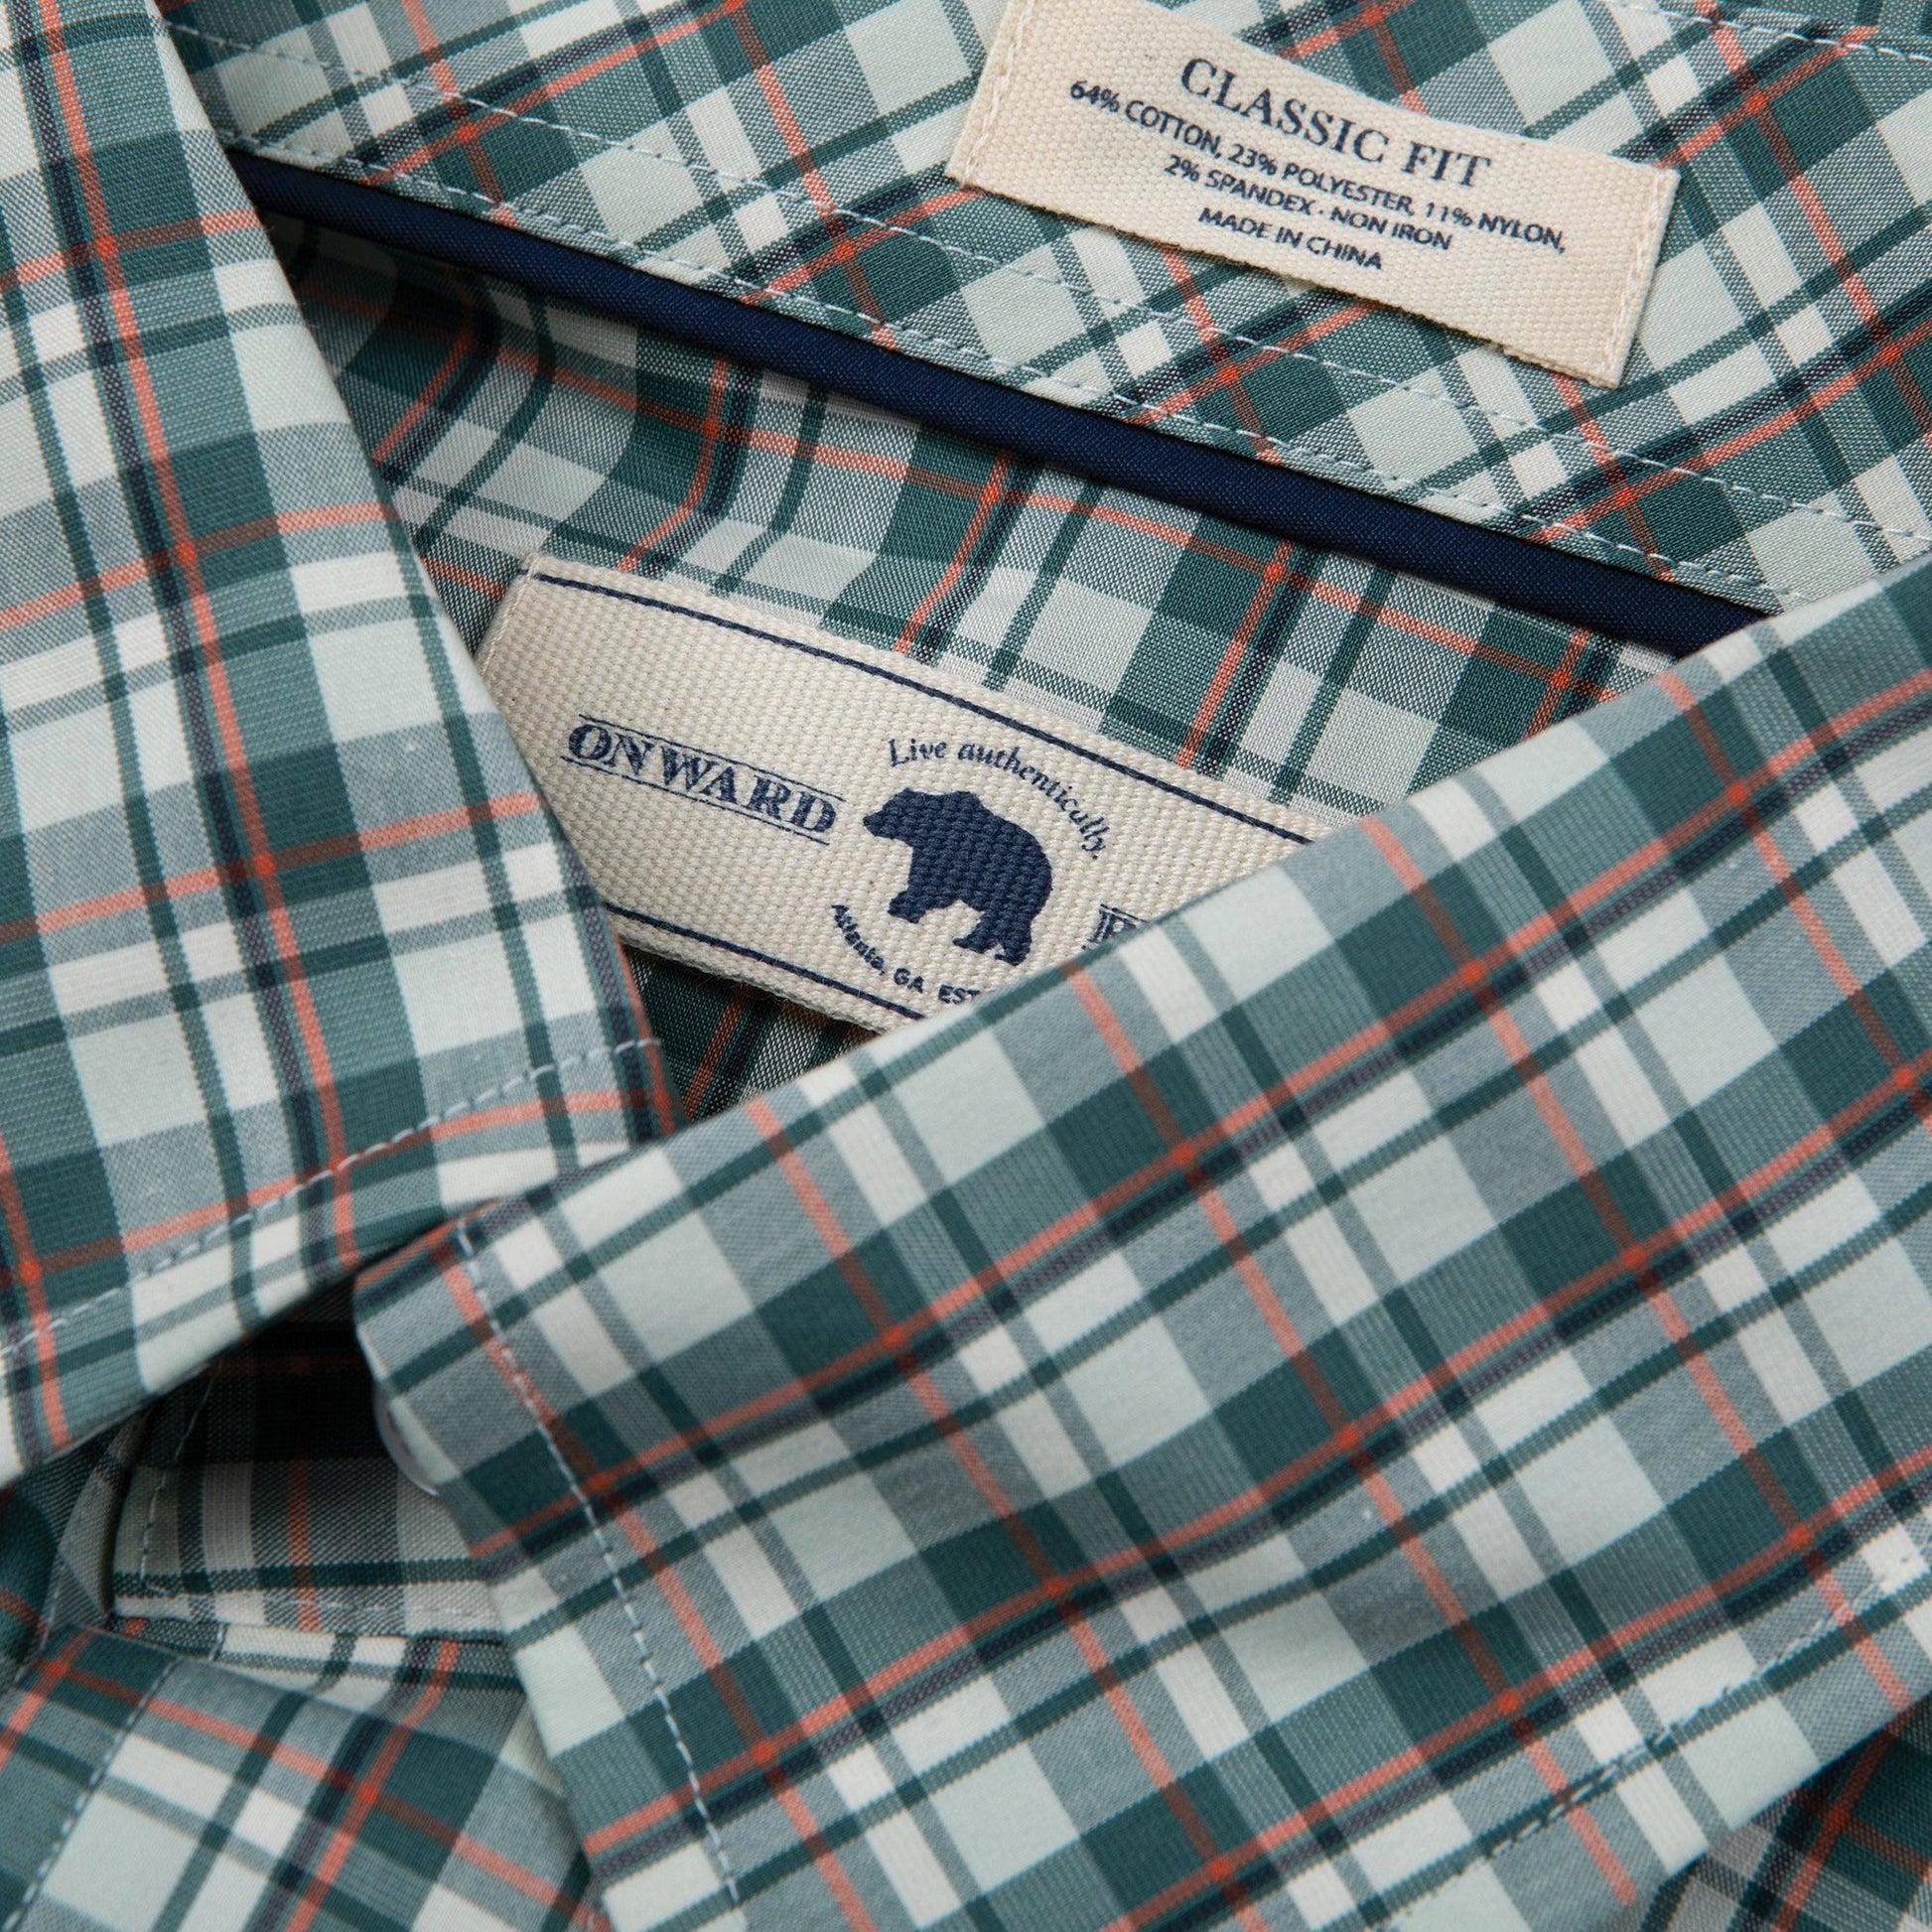 Greenwich Quad Classic Fit Button Down - Onward Reserve